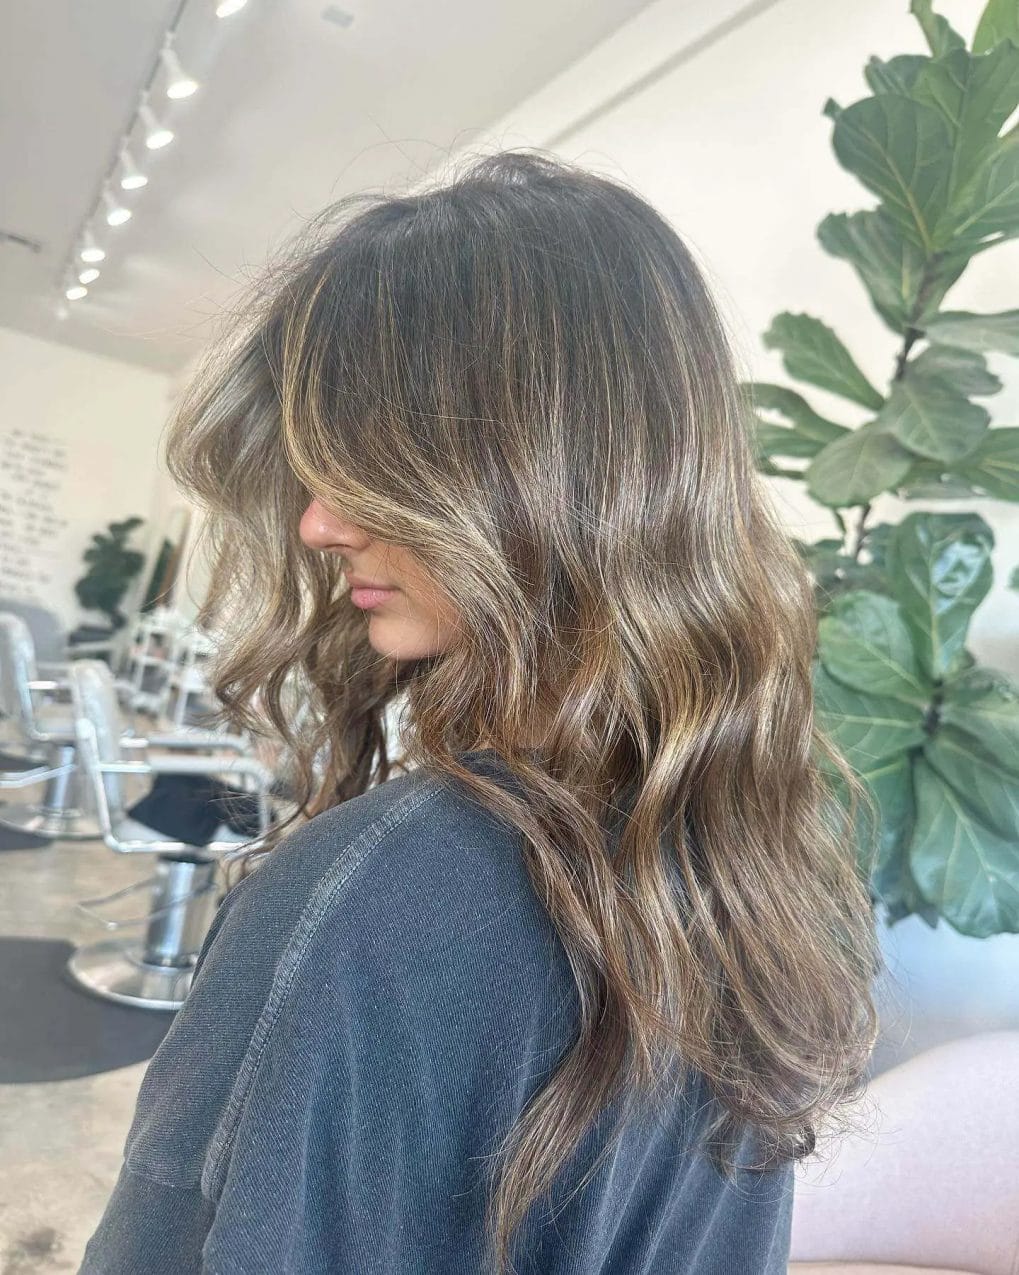 Textured waves with sun-kissed highlights on hair.